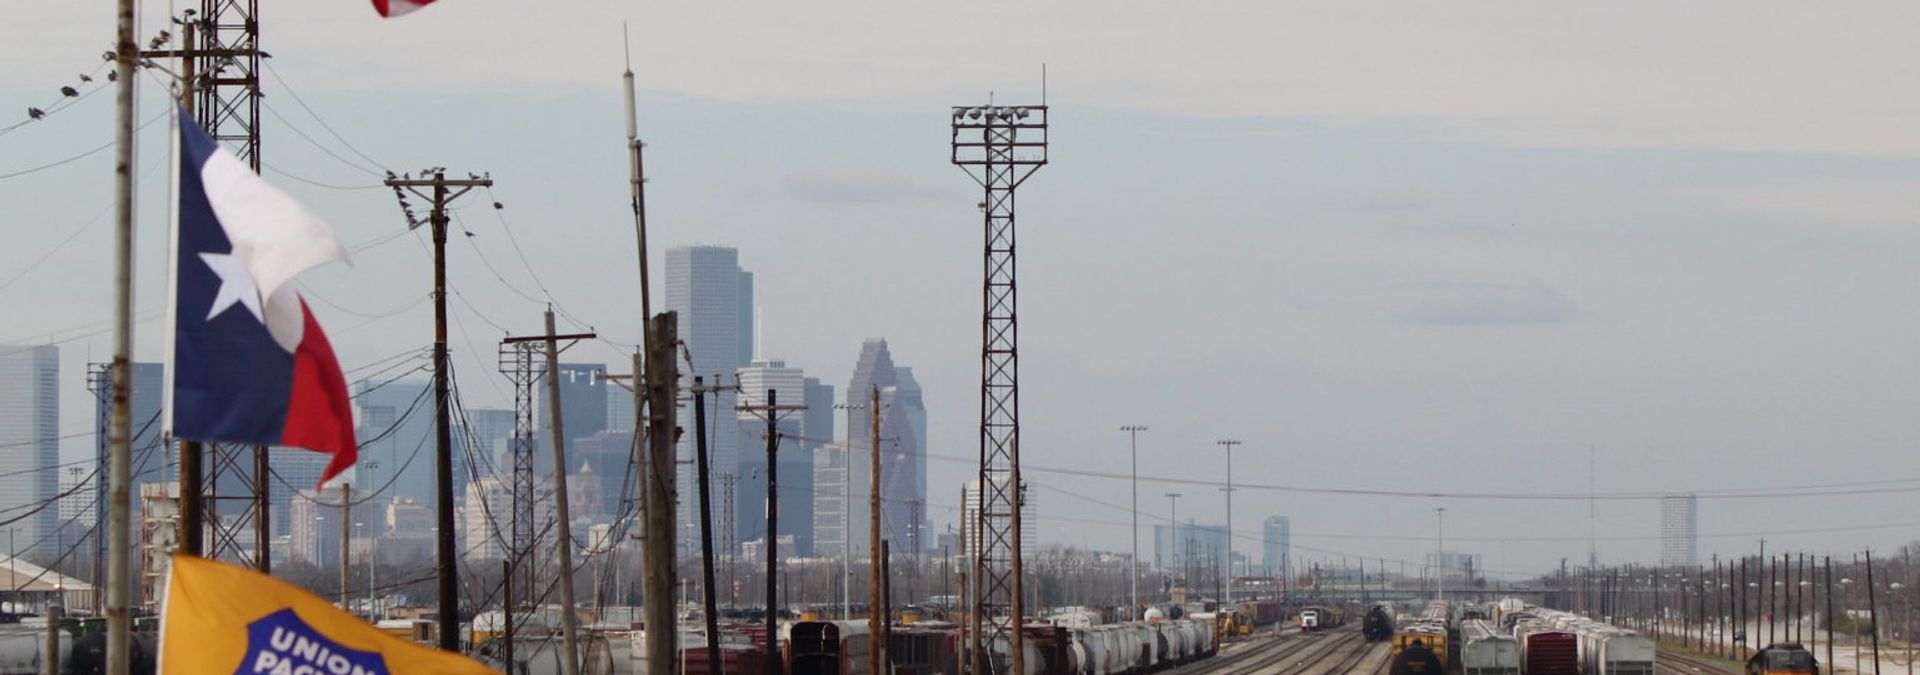 Houston Mayor Sylvester Turner is urging for the creosote contamination at the Union Pacific Englewood yard to be designated a Superfund site. Photo: Roy Luck. Flickr, Creative Commons License.